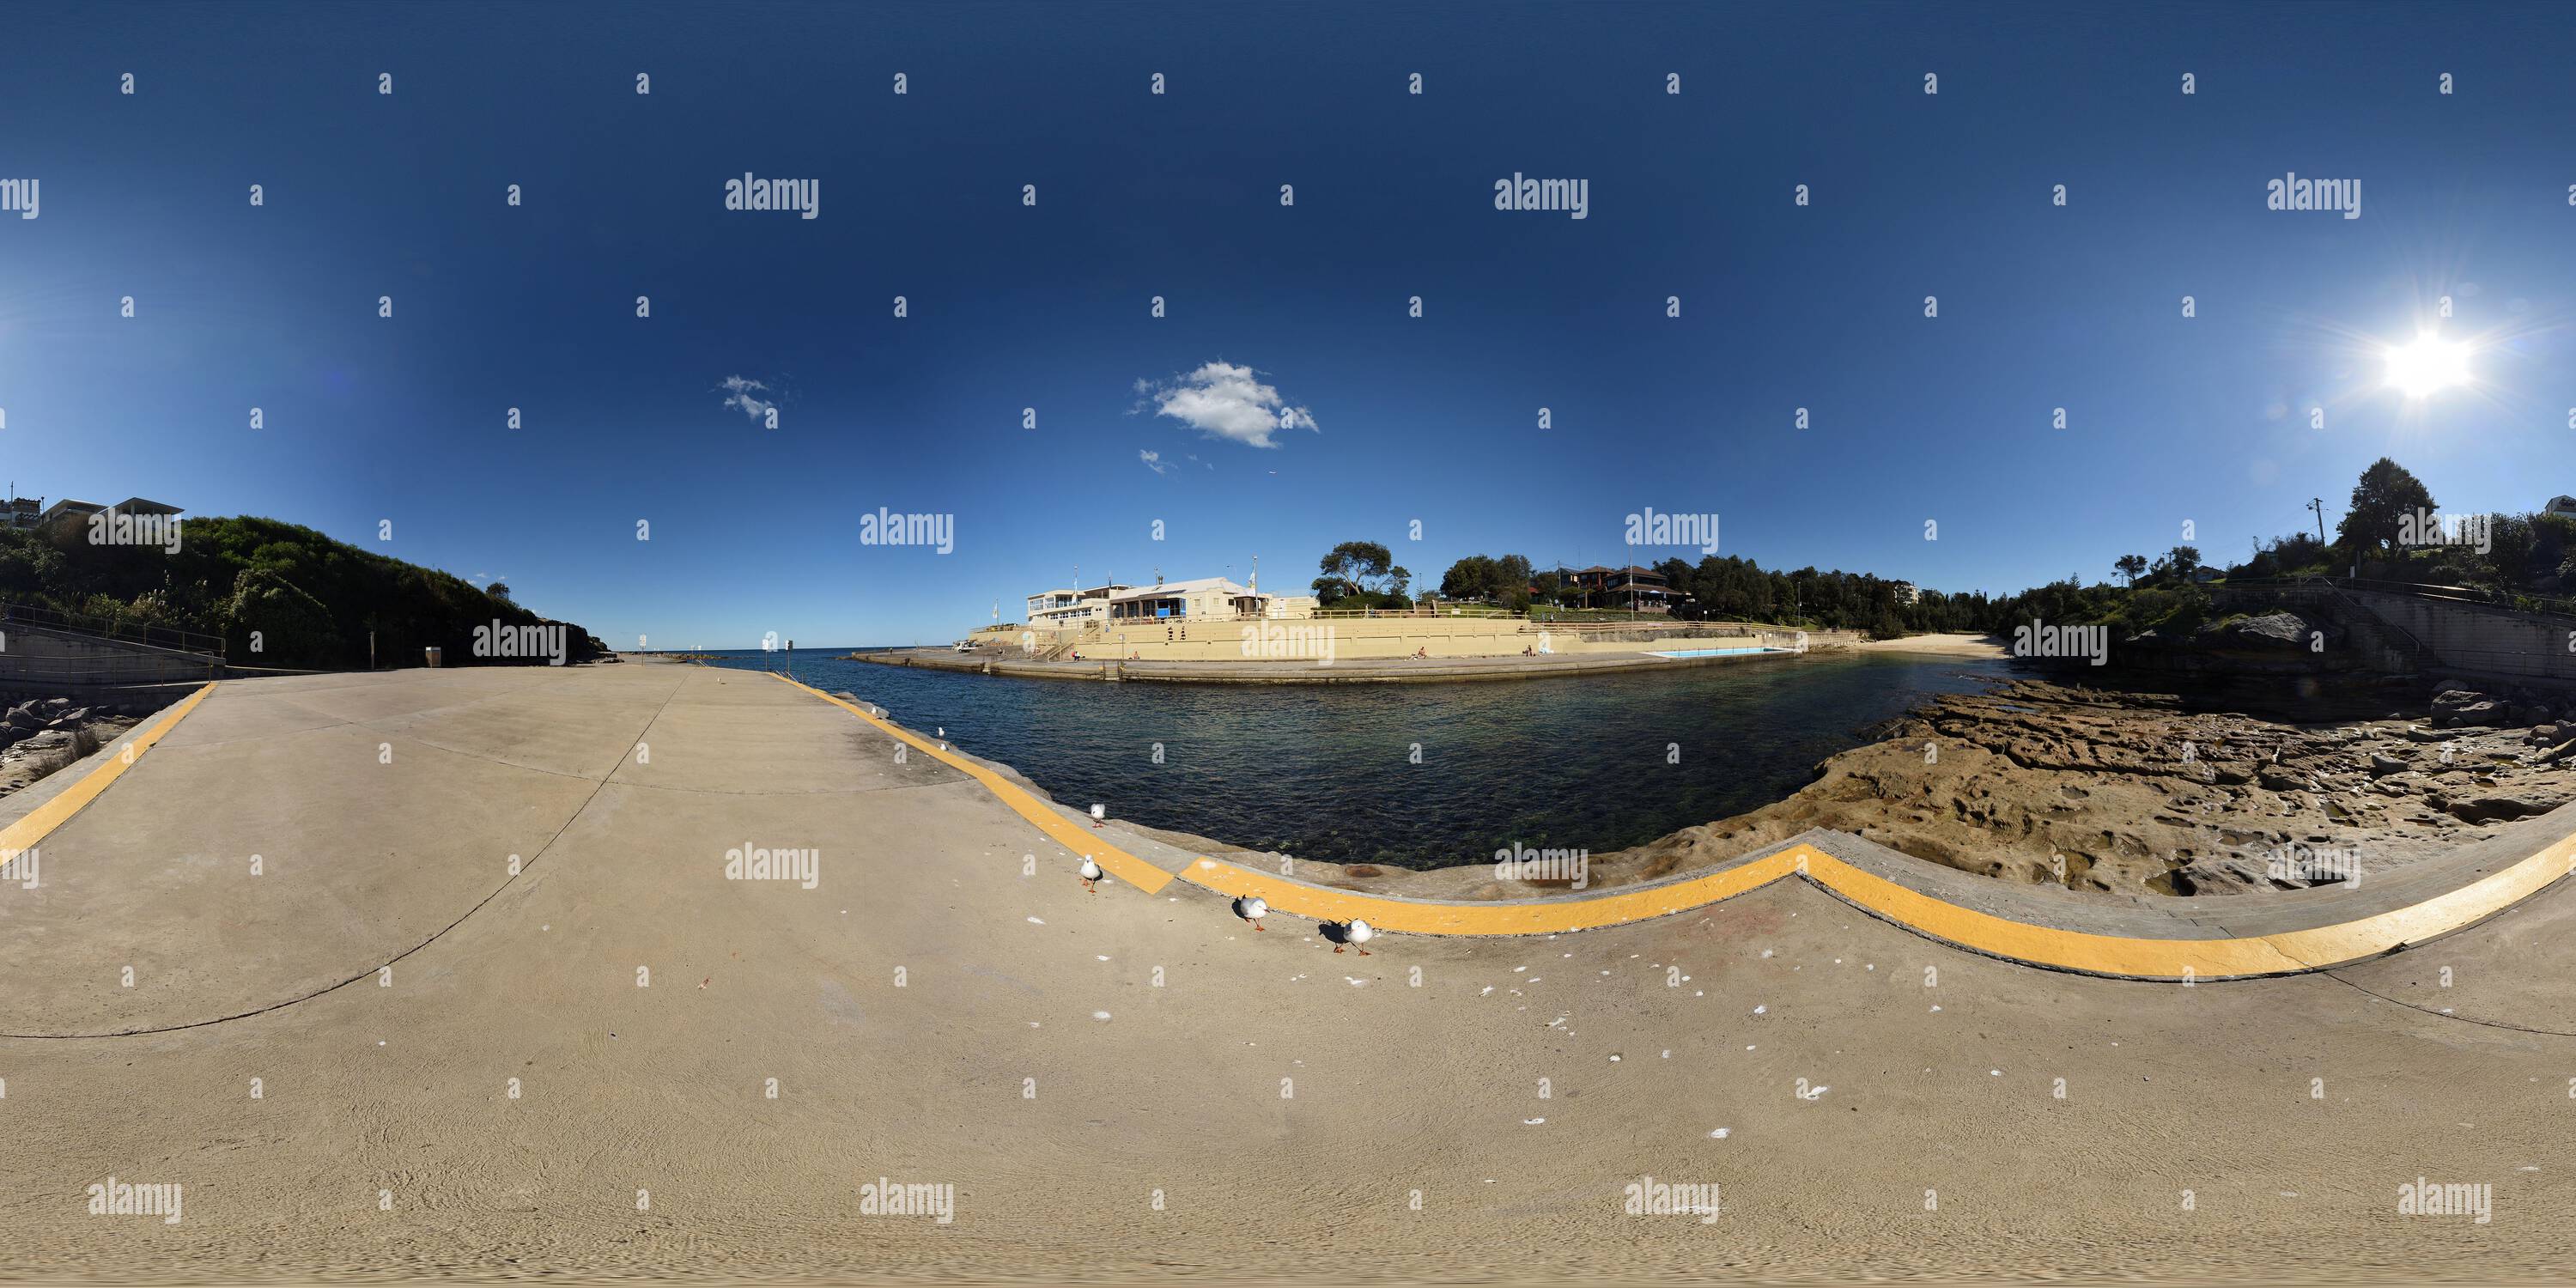 360 degree panoramic view of 360° Panorama - A sea of concrete, the northern sunbathing platform at Clovelly Ocean pool.